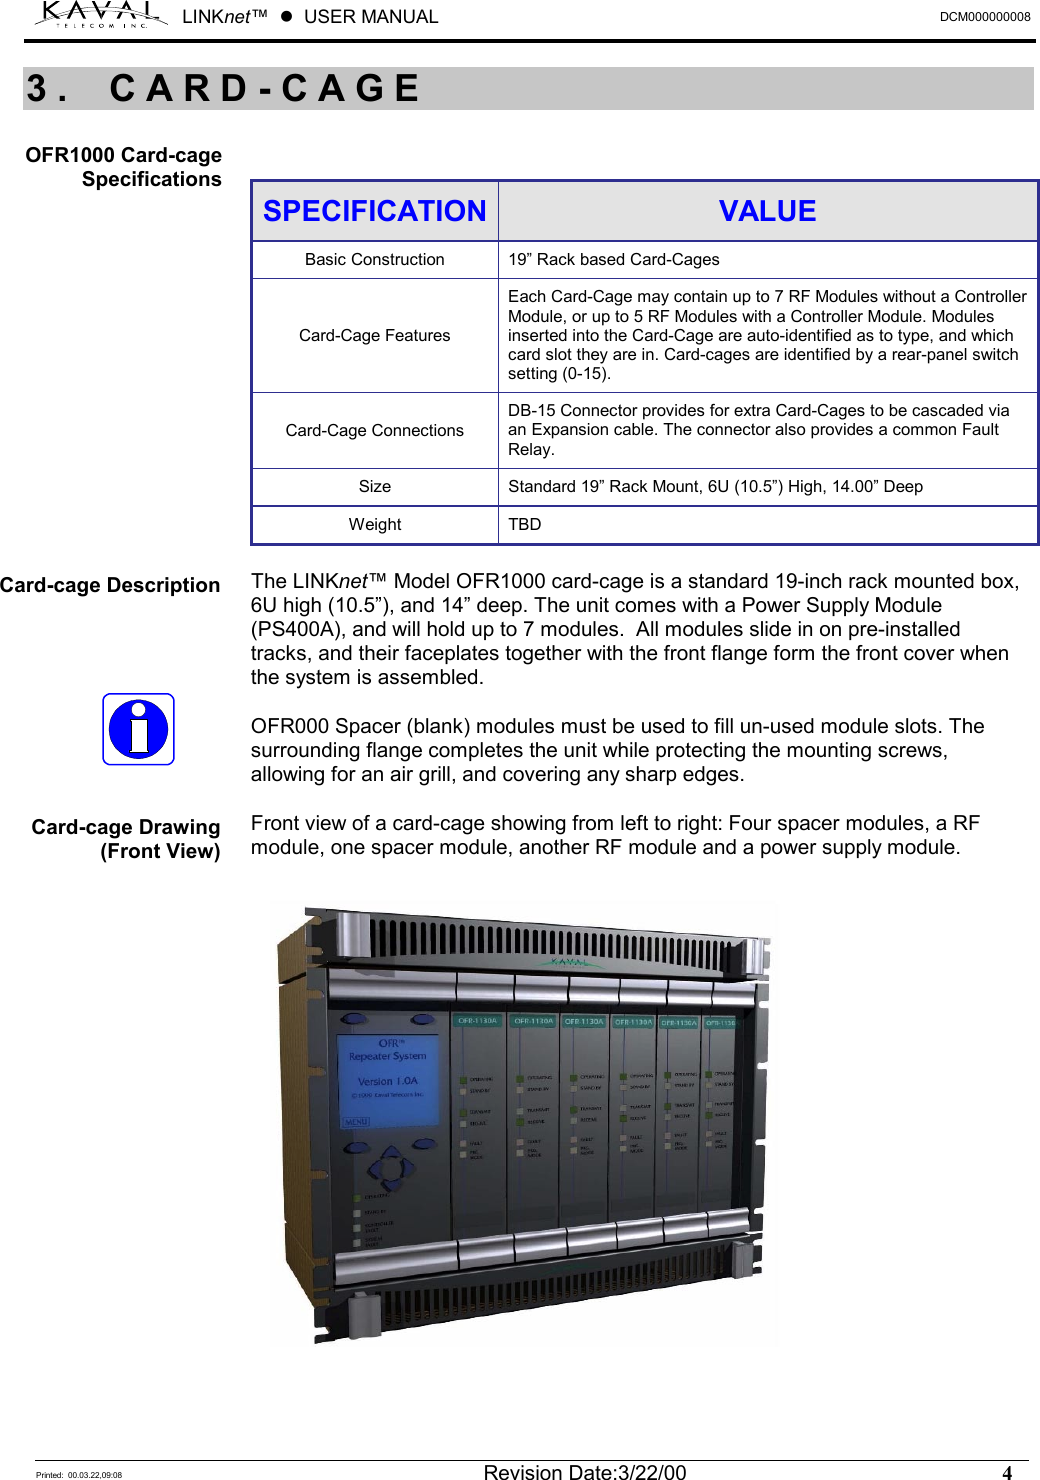 LINKnet™  !  USER MANUAL  DCM000000008   Printed:  00.03.22,09:08  Revision Date:3/22/00    4    SPECIFICATION  VALUE Basic Construction  19” Rack based Card-Cages Card-Cage Features Each Card-Cage may contain up to 7 RF Modules without a Controller Module, or up to 5 RF Modules with a Controller Module. Modules inserted into the Card-Cage are auto-identified as to type, and which card slot they are in. Card-cages are identified by a rear-panel switch setting (0-15). Card-Cage Connections DB-15 Connector provides for extra Card-Cages to be cascaded via an Expansion cable. The connector also provides a common Fault Relay. Size  Standard 19” Rack Mount, 6U (10.5”) High, 14.00” Deep Weight TBD  The LINKnet™ Model OFR1000 card-cage is a standard 19-inch rack mounted box, 6U high (10.5”), and 14” deep. The unit comes with a Power Supply Module (PS400A), and will hold up to 7 modules.  All modules slide in on pre-installed tracks, and their faceplates together with the front flange form the front cover when the system is assembled.  OFR000 Spacer (blank) modules must be used to fill un-used module slots. The surrounding flange completes the unit while protecting the mounting screws, allowing for an air grill, and covering any sharp edges.  Front view of a card-cage showing from left to right: Four spacer modules, a RF module, one spacer module, another RF module and a power supply module. 3. CARD-CAGE OFR1000 Card-cage Specifications Card-cage Description Card-cage Drawing (Front View) 